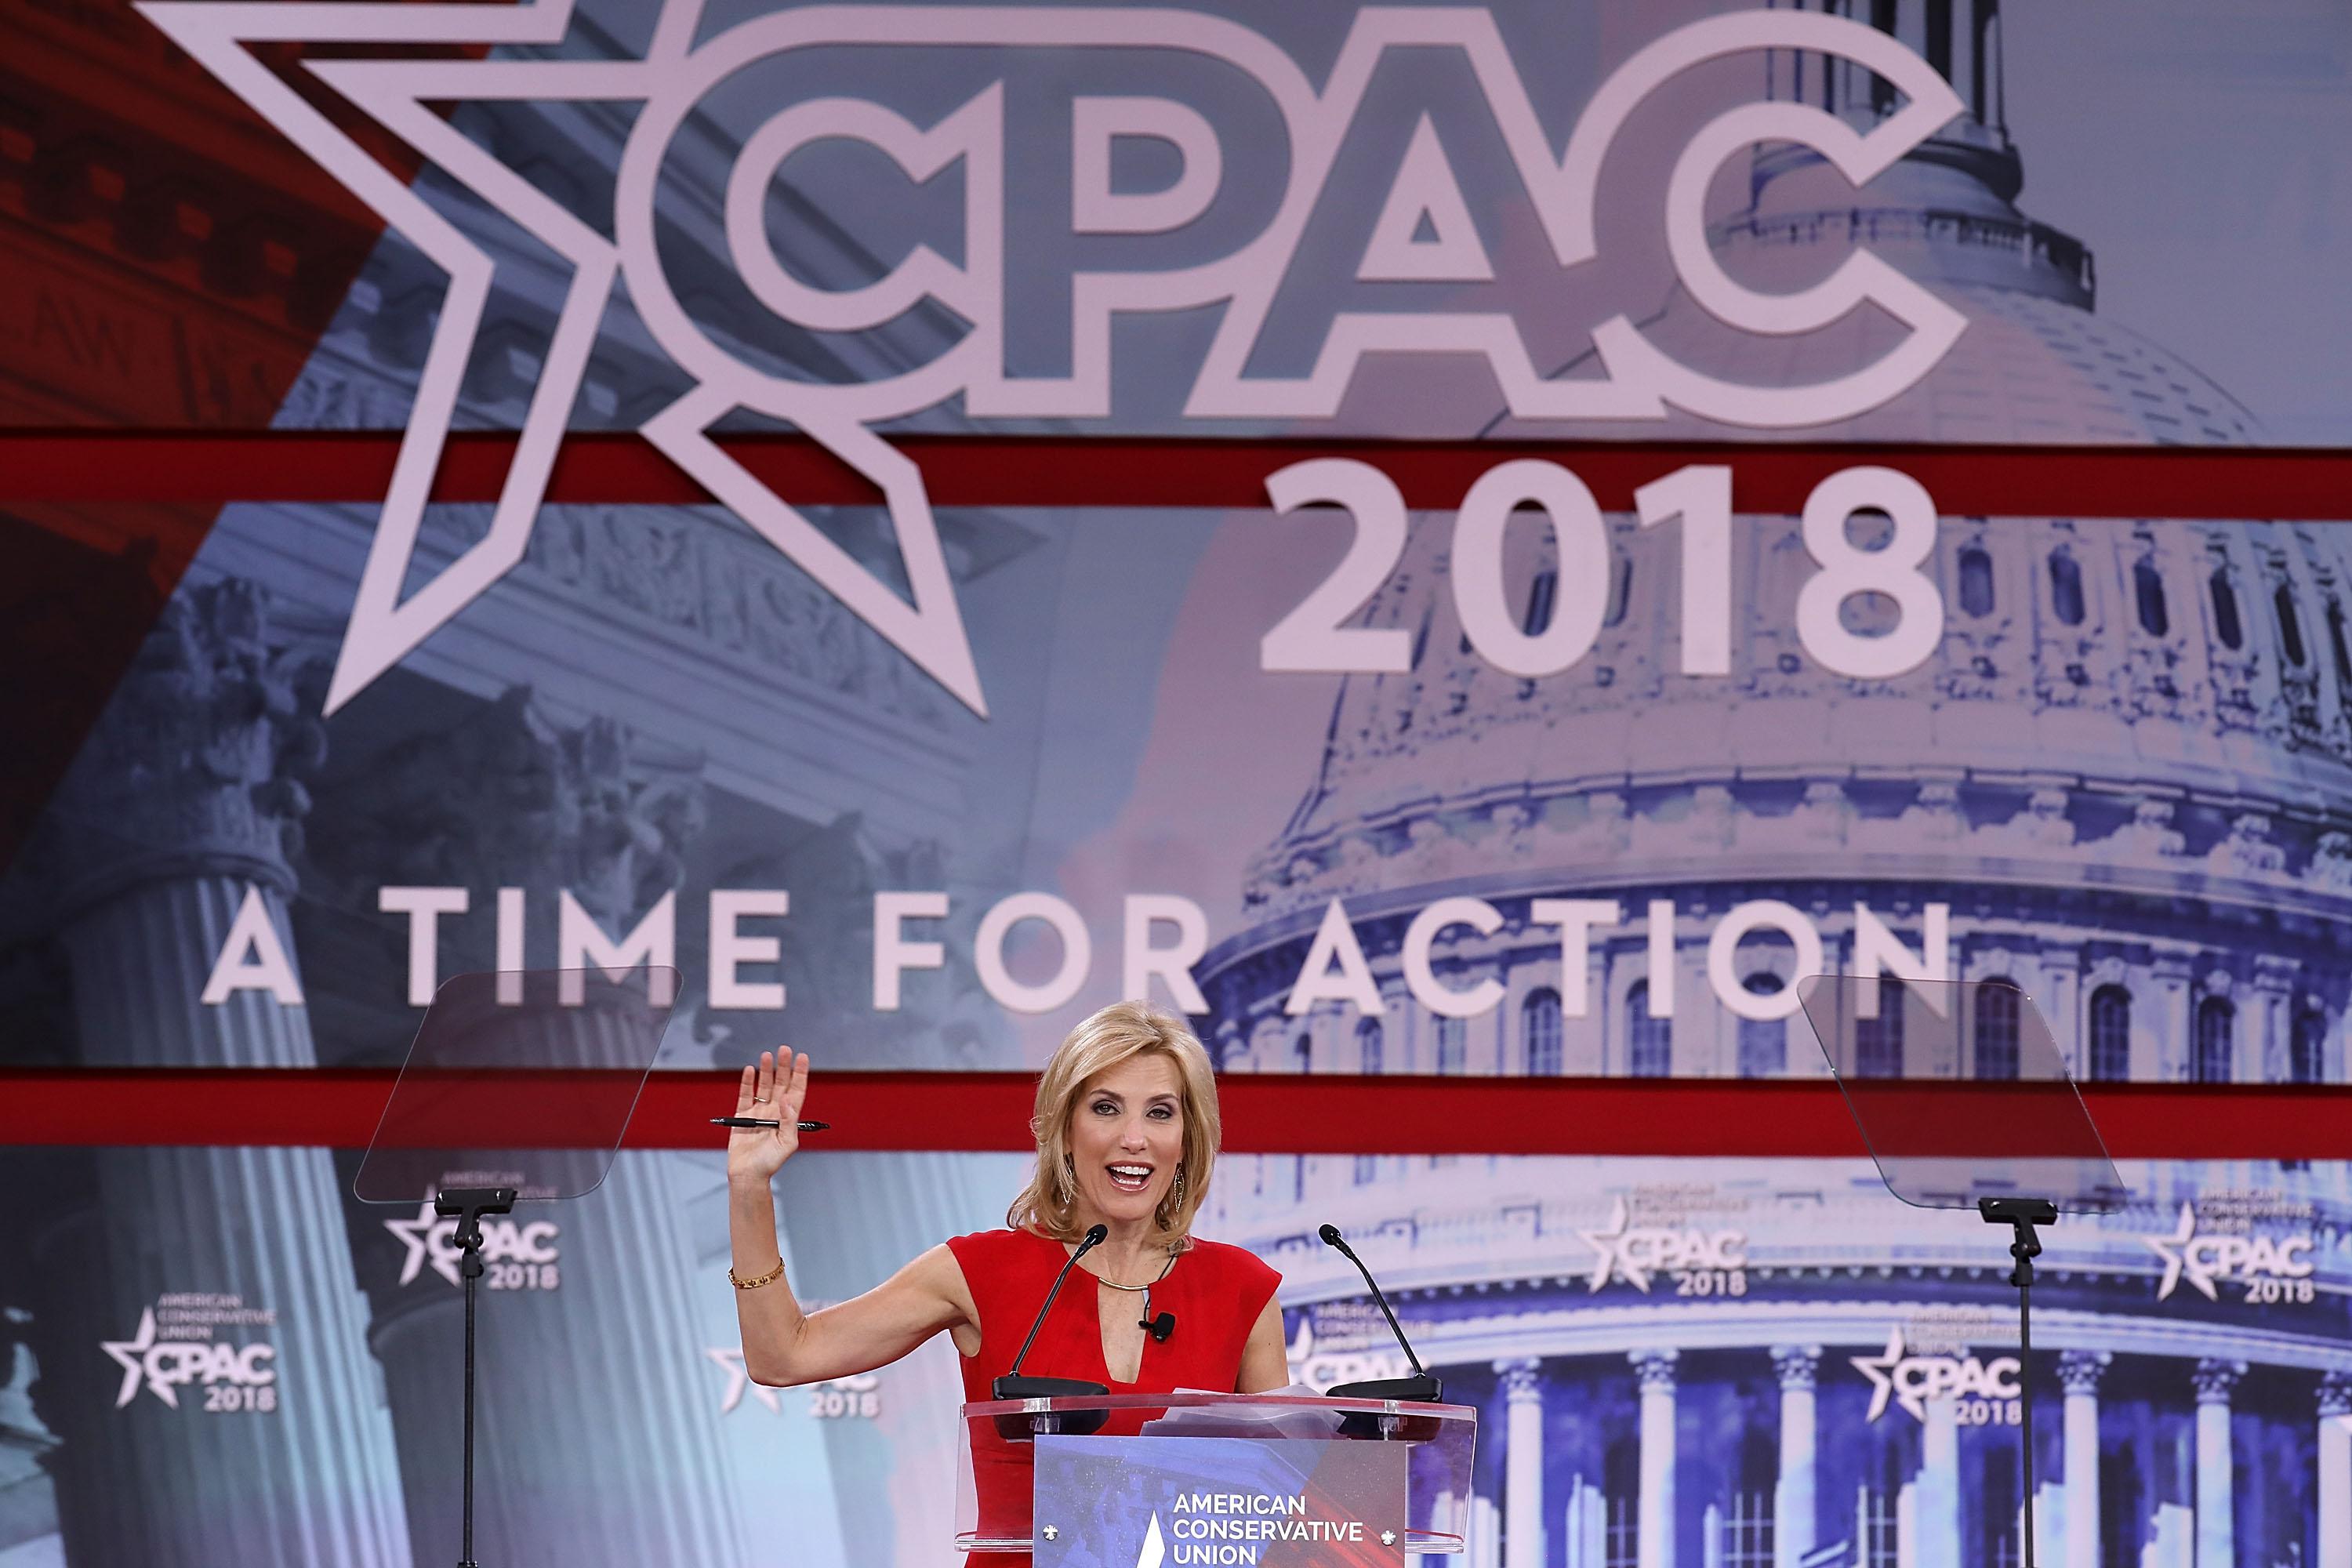 Laura Ingraham raises her right hand while addressing the crowd at CPAC 2018.